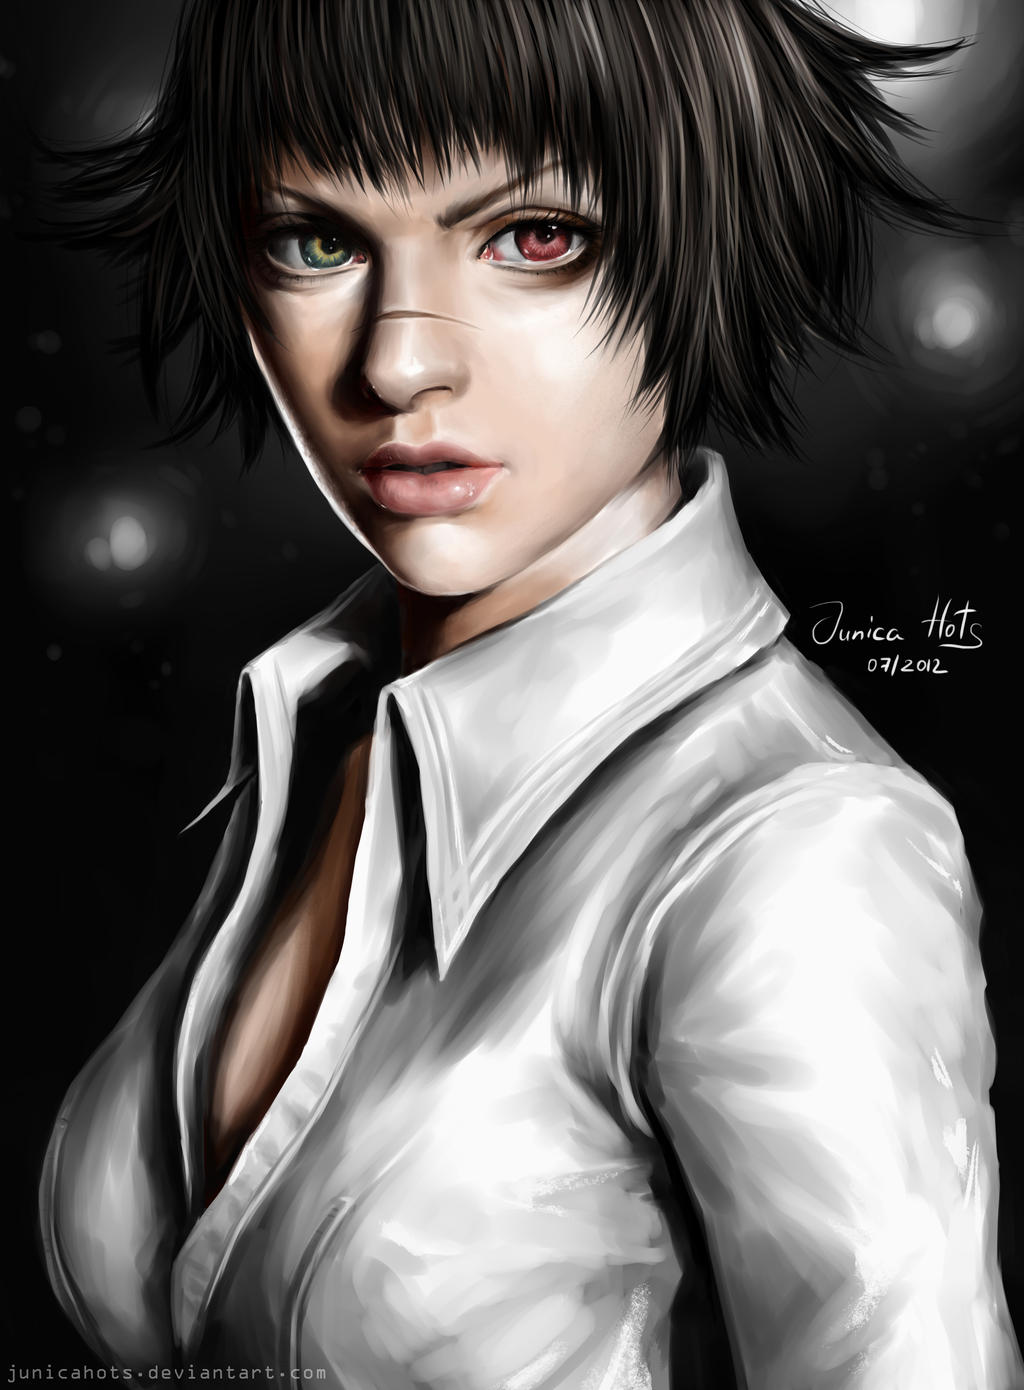 Devil May Cry 3: Lady by Tr3bor122 on DeviantArt